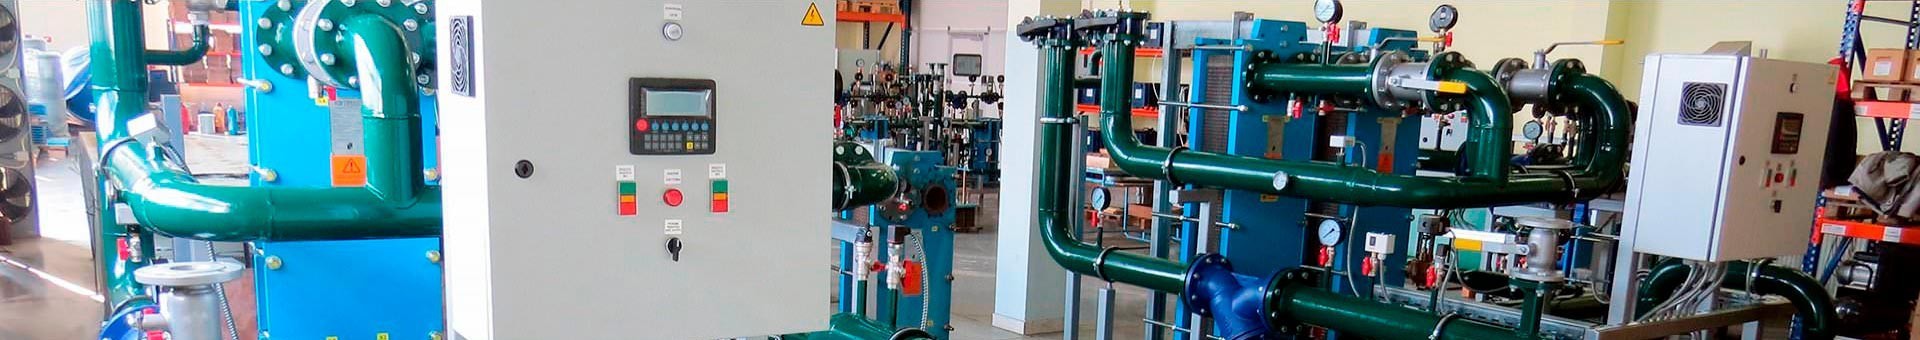 Heating of administrative premises of enterprises with the help of recovered heat of flue gases